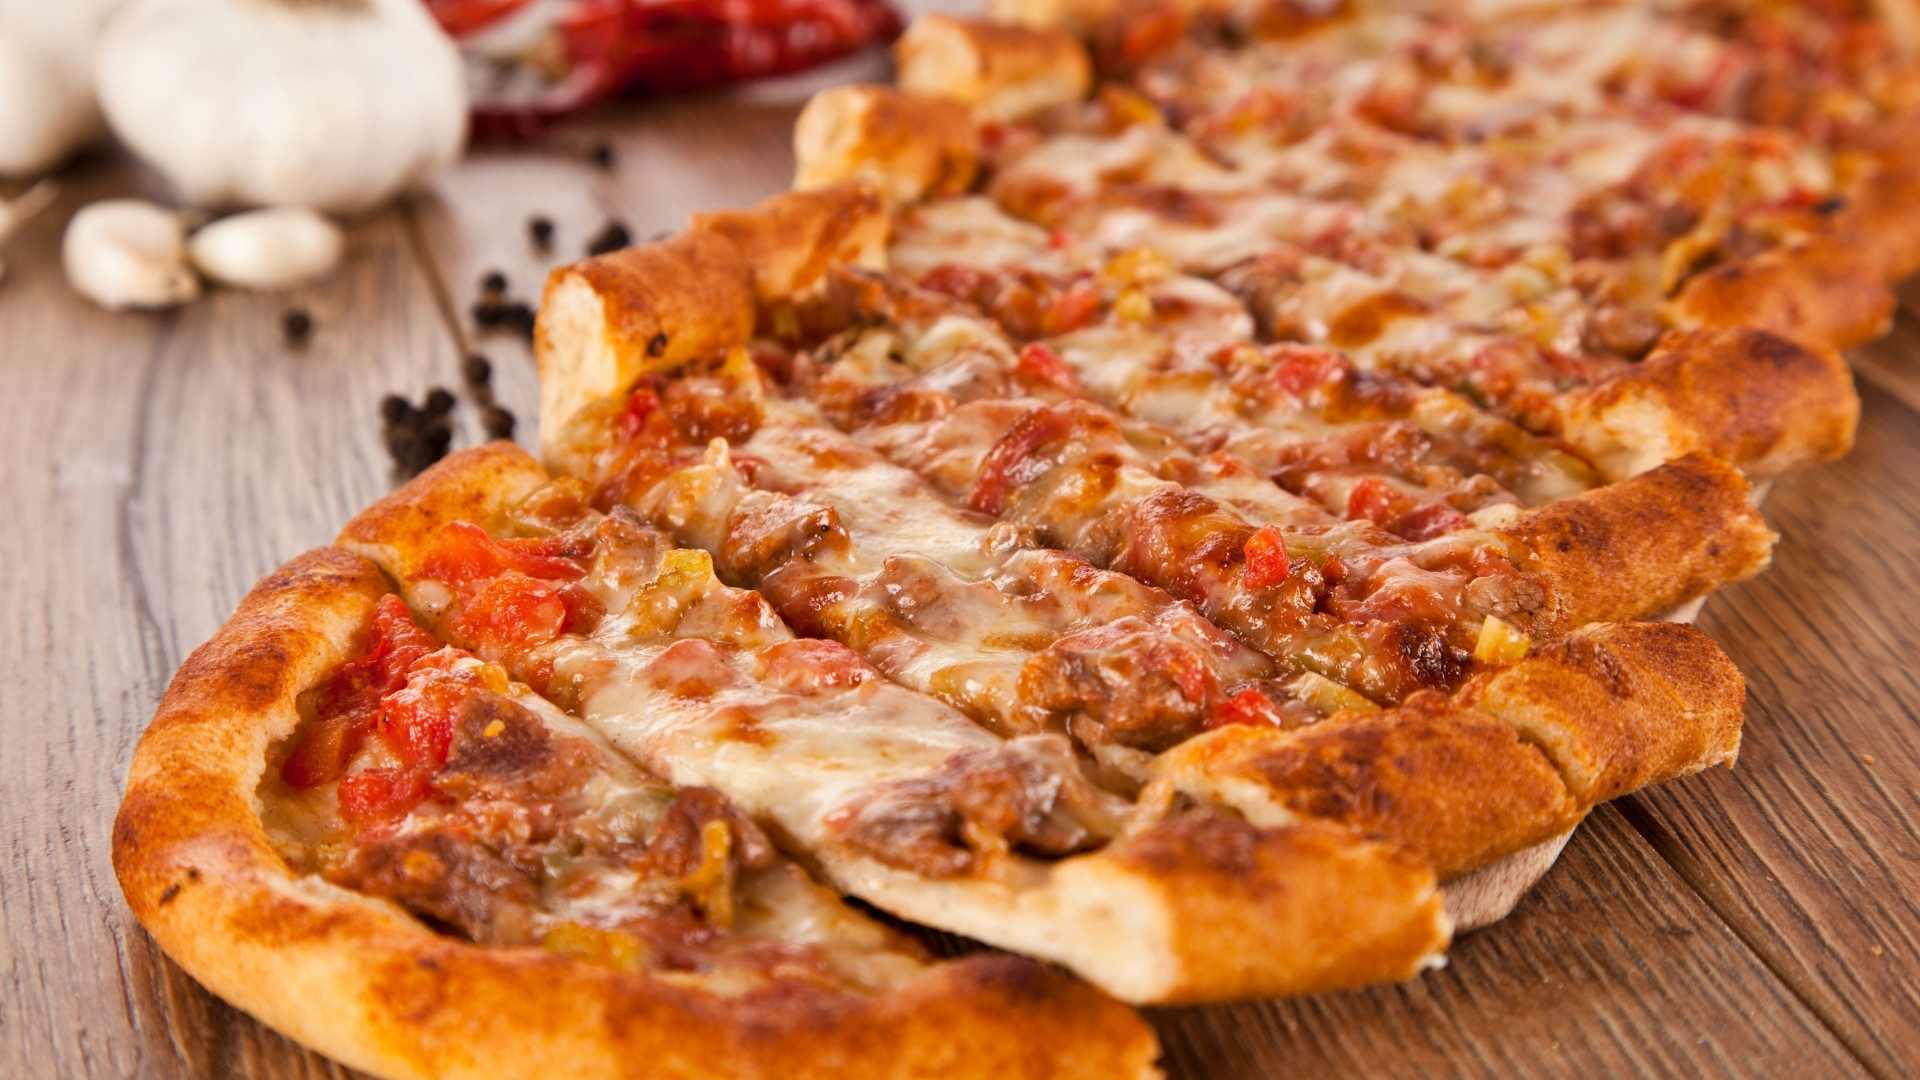 Get Your Hands on This Deliciously Satisfying Ground Beef Pide Recipe The Ultimate Comfort Food 2